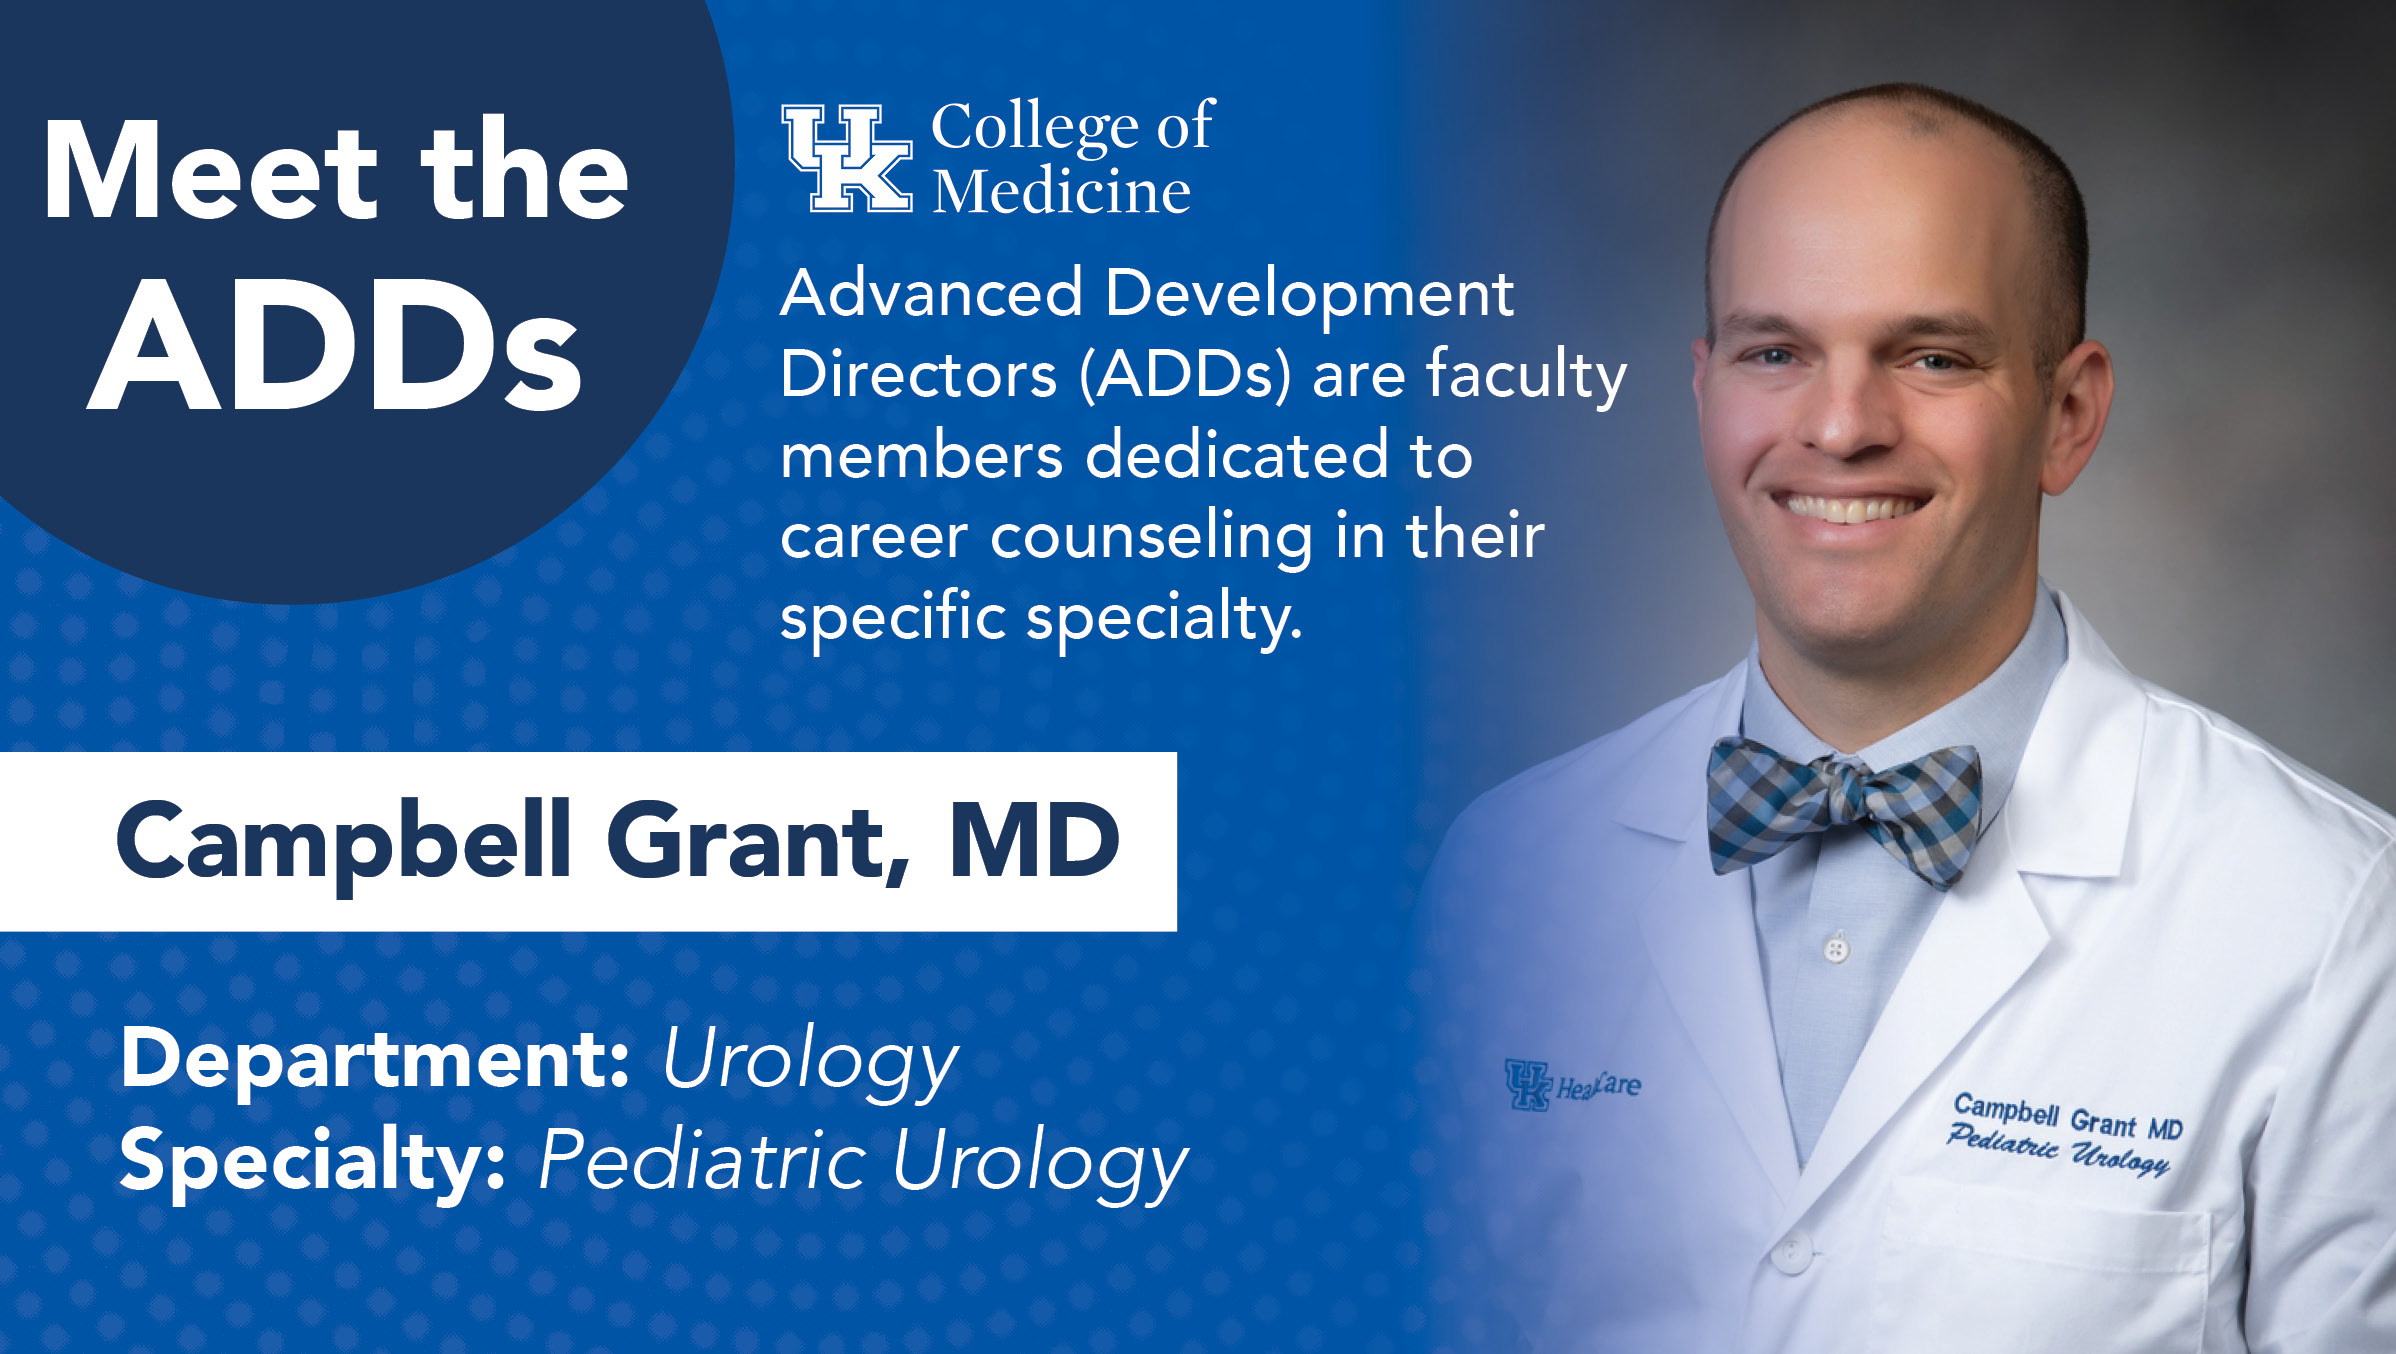 meet the ADDs spotlight on Dr. Cambpell Grant, who specializes in urology 